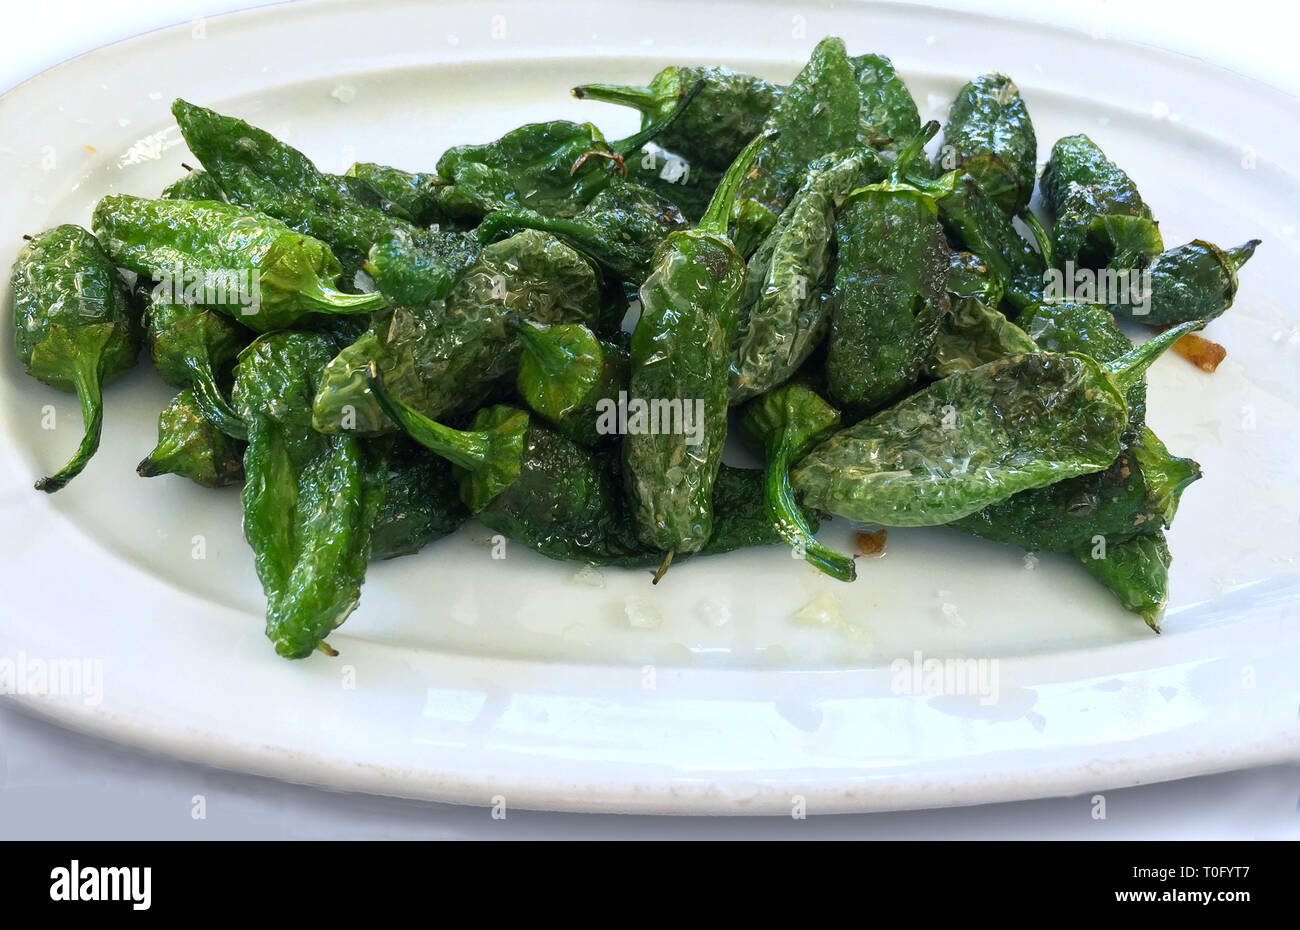 A plate of perfectly fried padron peppers on a white plate isolated on a white background Stock Photo